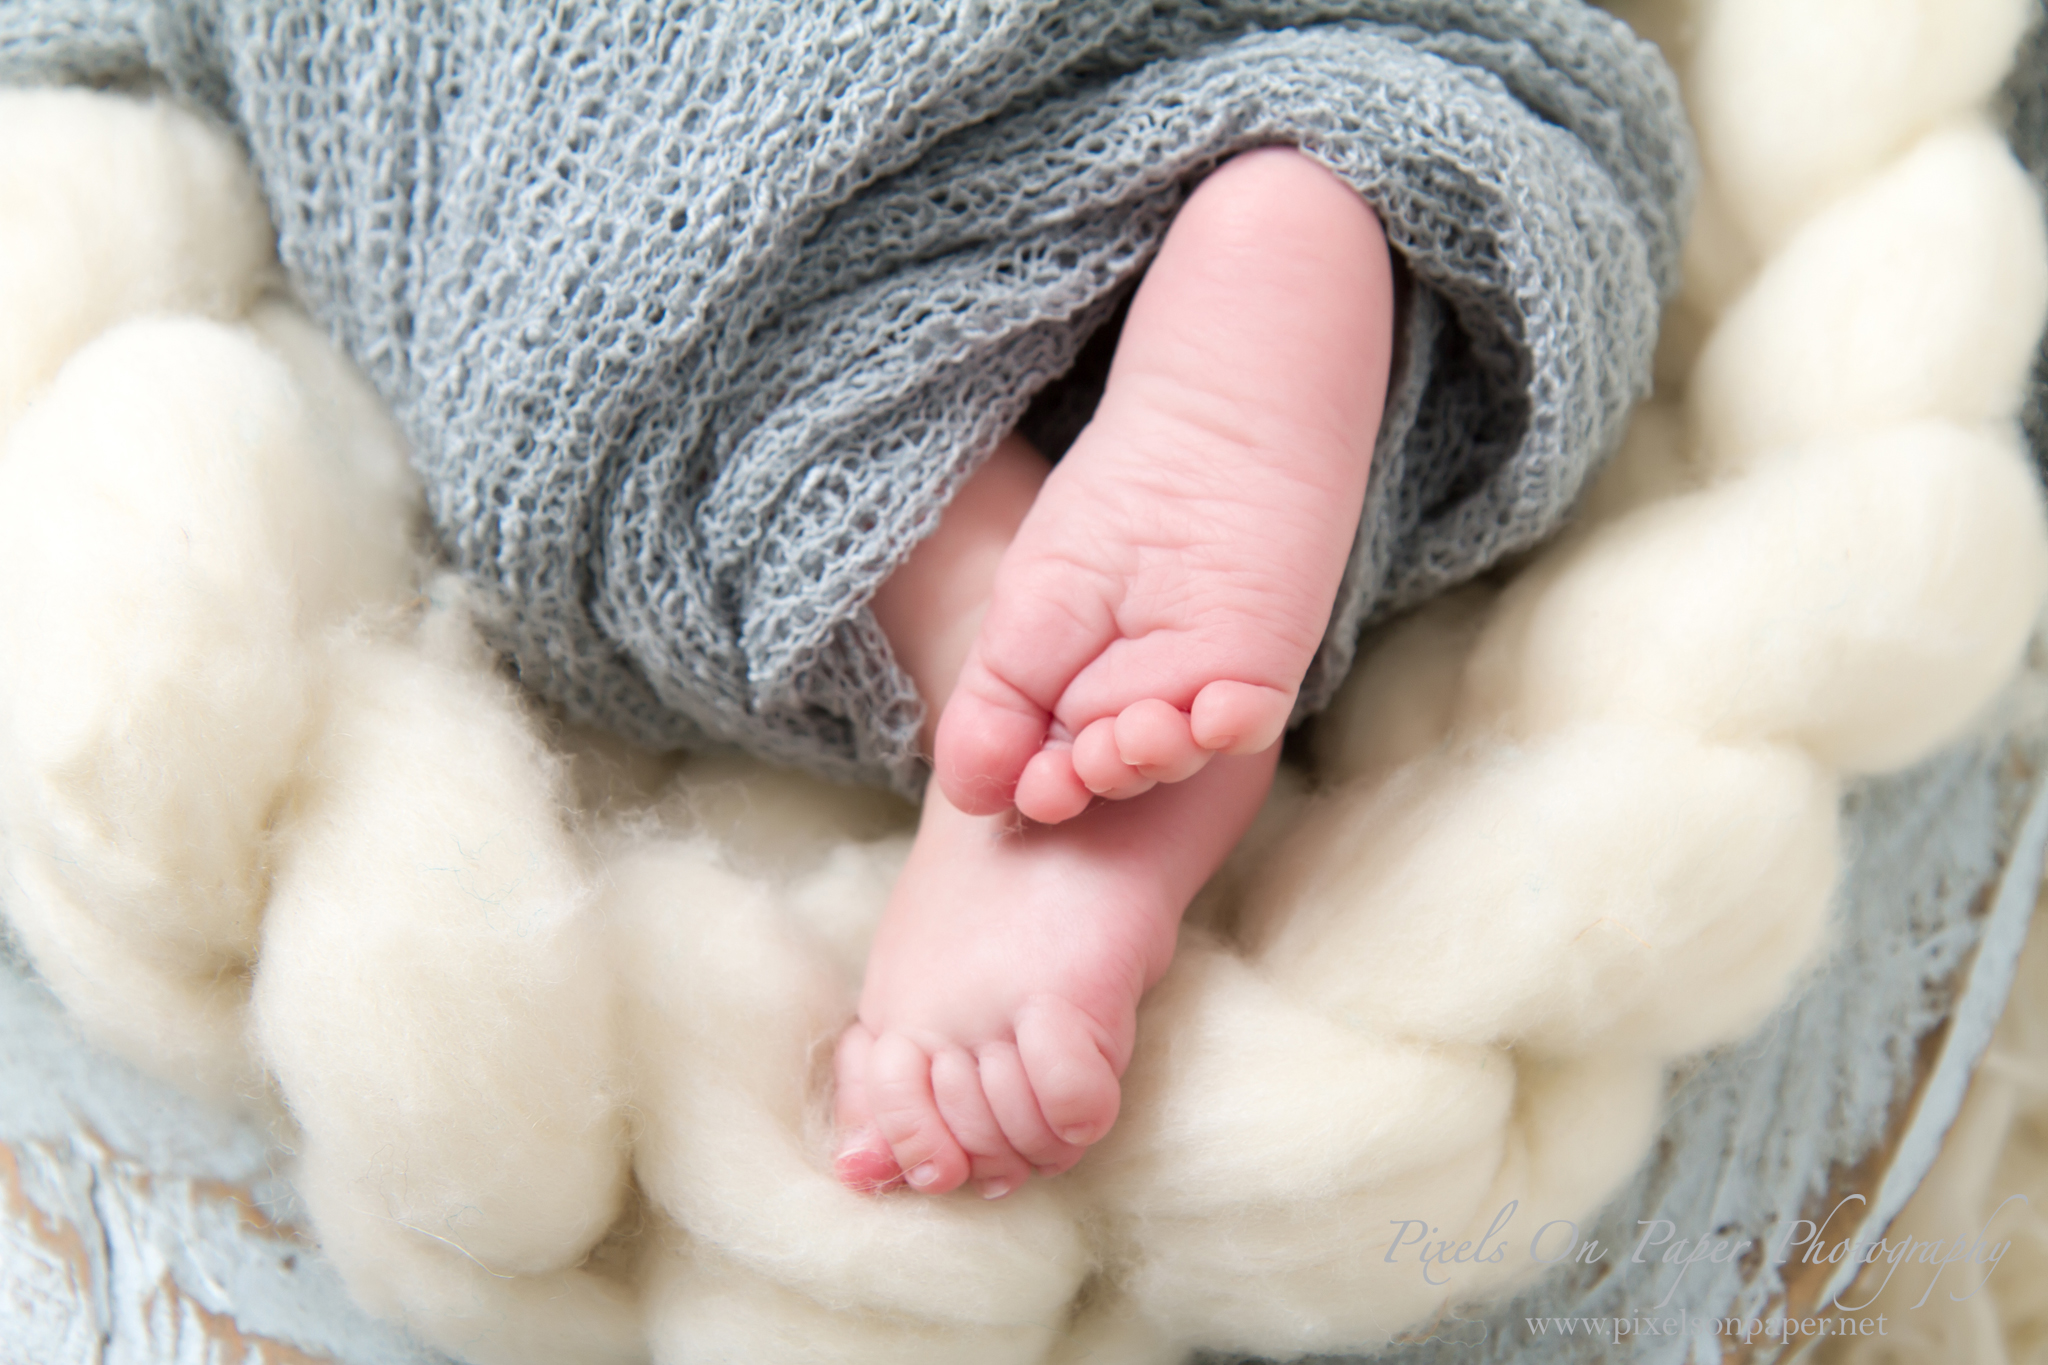 Tucker Matherly Newborn Photography by Pixels On Paper Portrait Photography photo